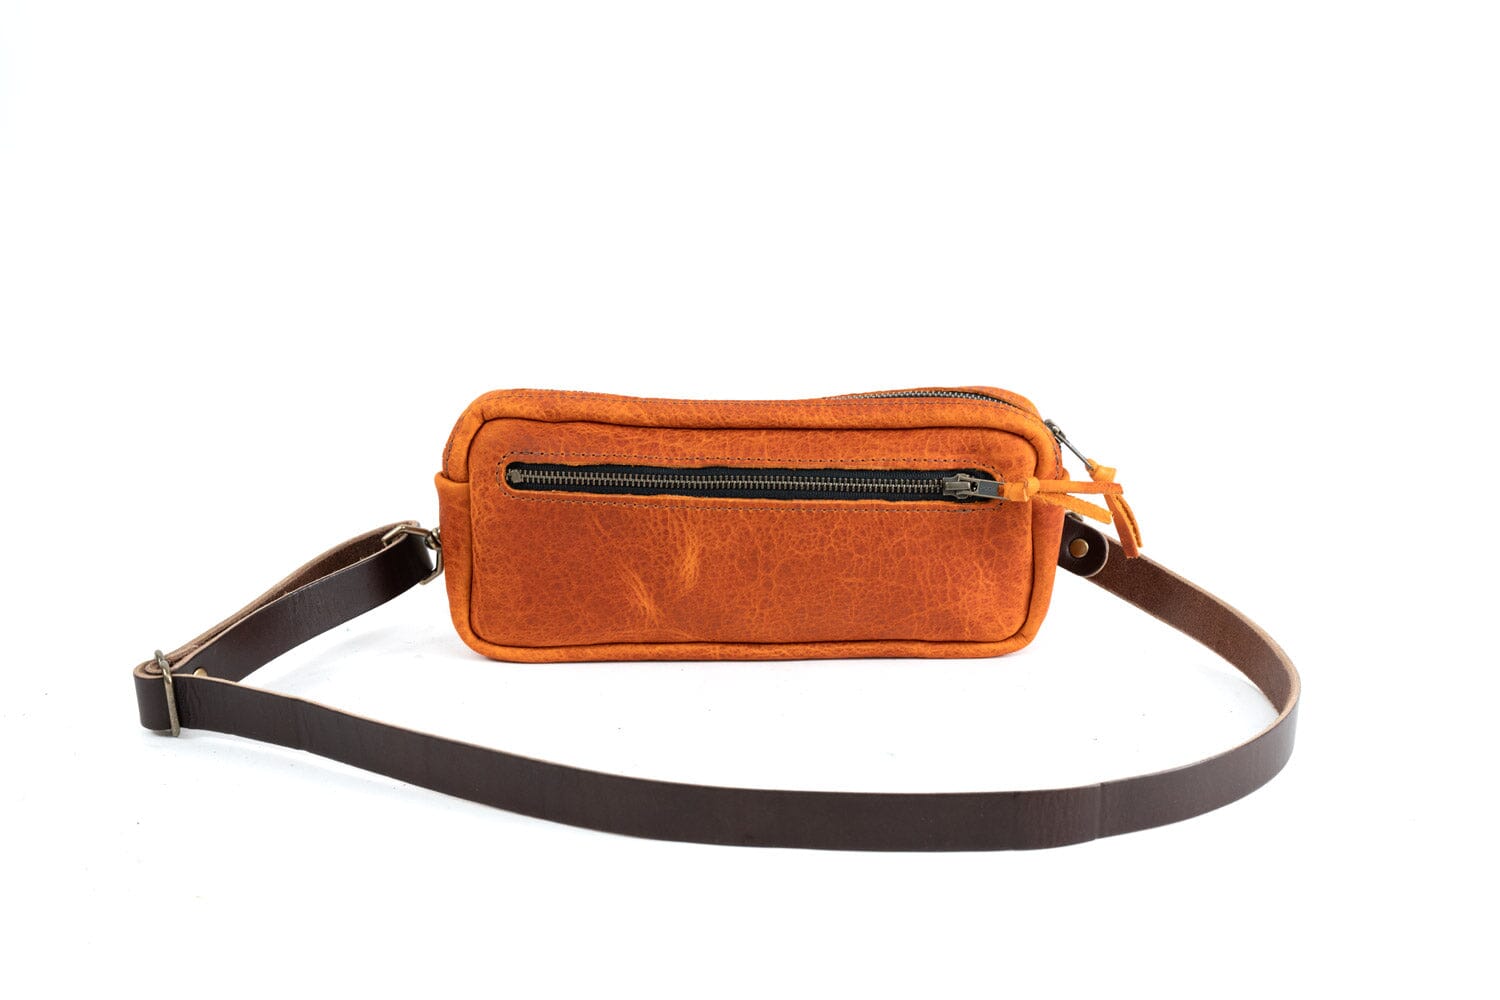 LEATHER FANNY PACK / LEATHER WAIST BAG - DELUXE - TANGERINE BISON